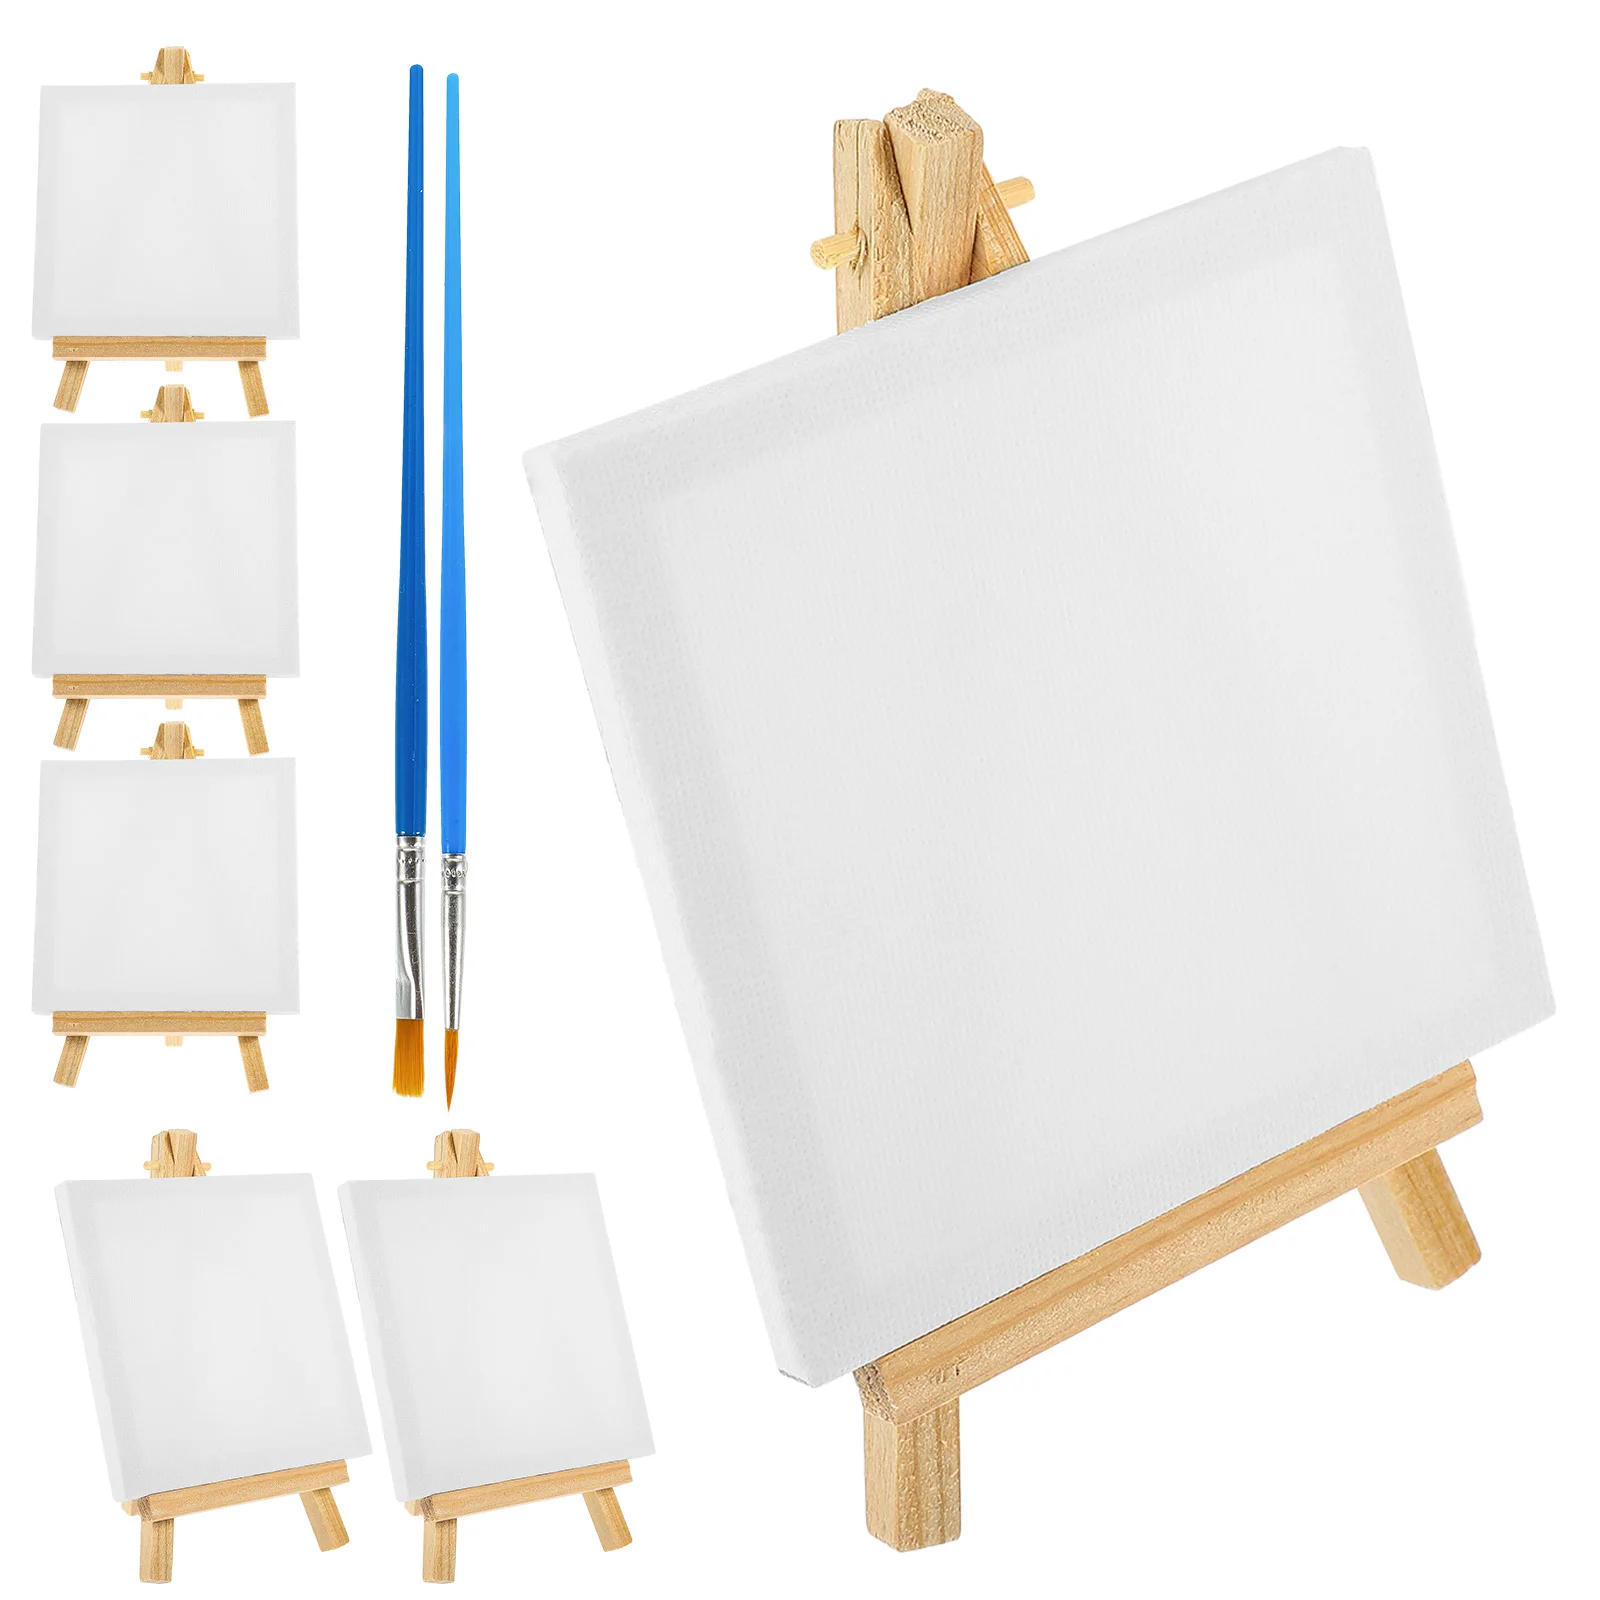 Miniature Kit Oil Easel Canvas Painting for Kids Small Bracket Adults Supplies Child